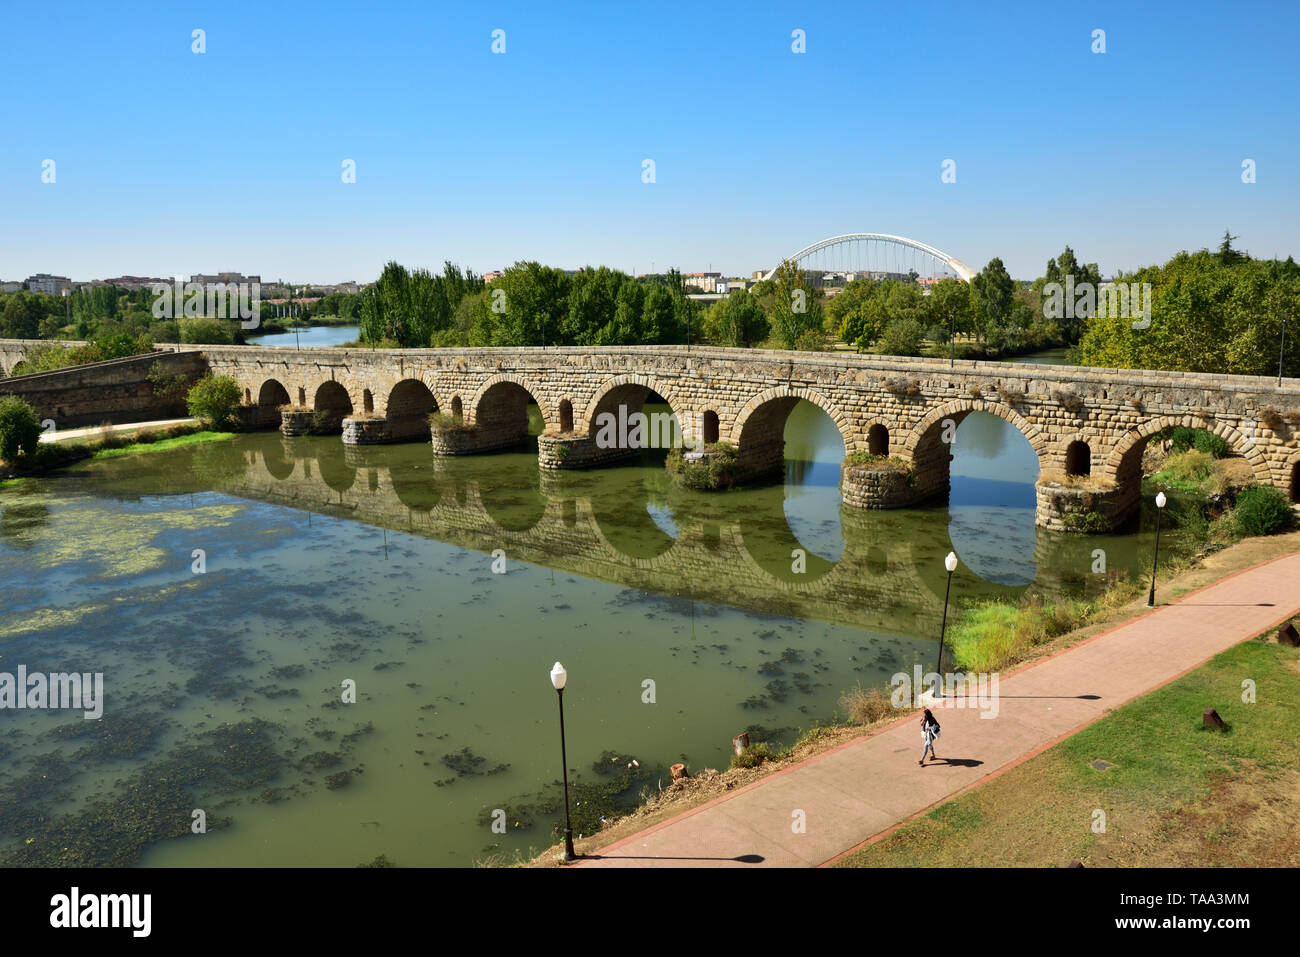 The Puente Romano (Roman Bridge) over the Guadiana river, dating back to the 1st century BC. It is the world's longest bridge from ancient times. A Un Stock Photo